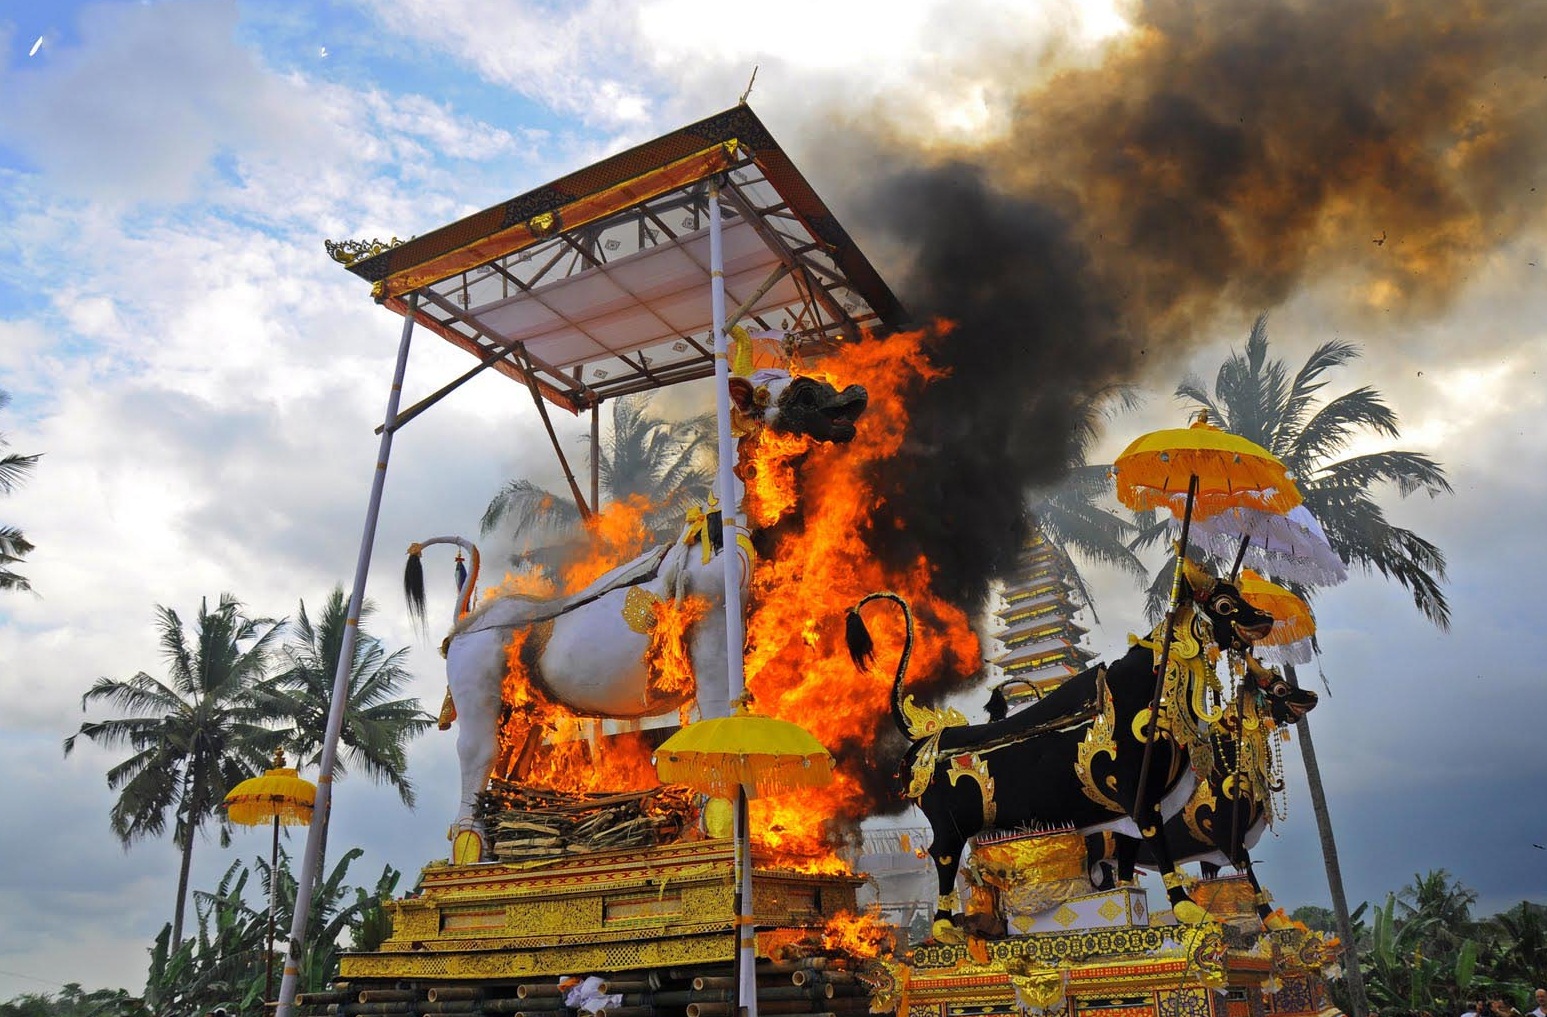 File photo of a ngaben traditional cremation rite performed in Bali. Photo: Buleleng Regency